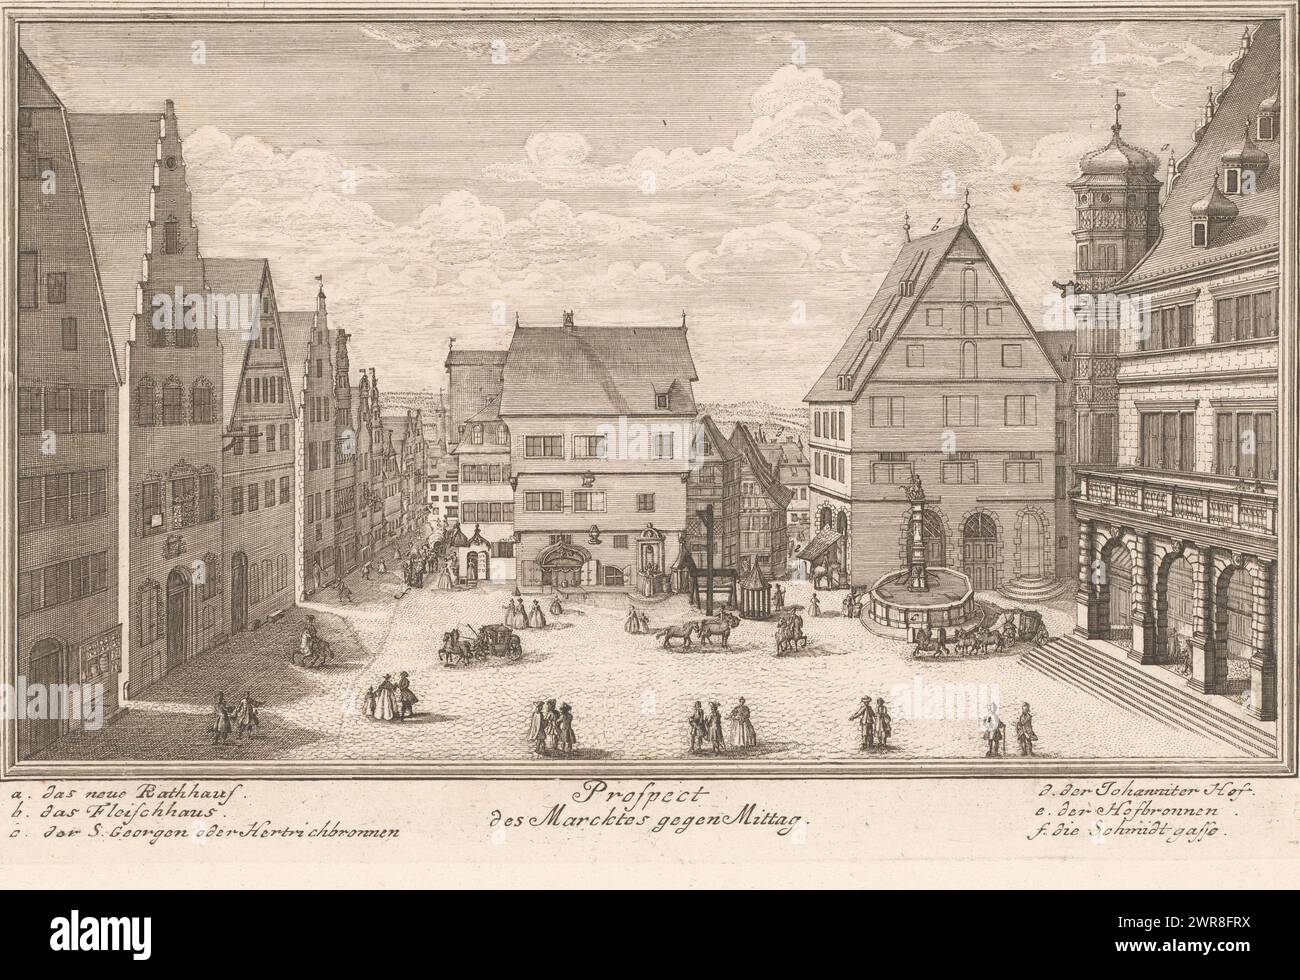 View of the Market, in Rothenburg ob der Tauber, Prospect des Marcktes gegen Mittag (title on object), Numbered top right: 5., print maker: anonymous, publisher: Adam Wolfgang Winterschmidt, 1758 - 1796, paper, etching, engraving, height 198 mm × width 302 mm, print Stock Photo